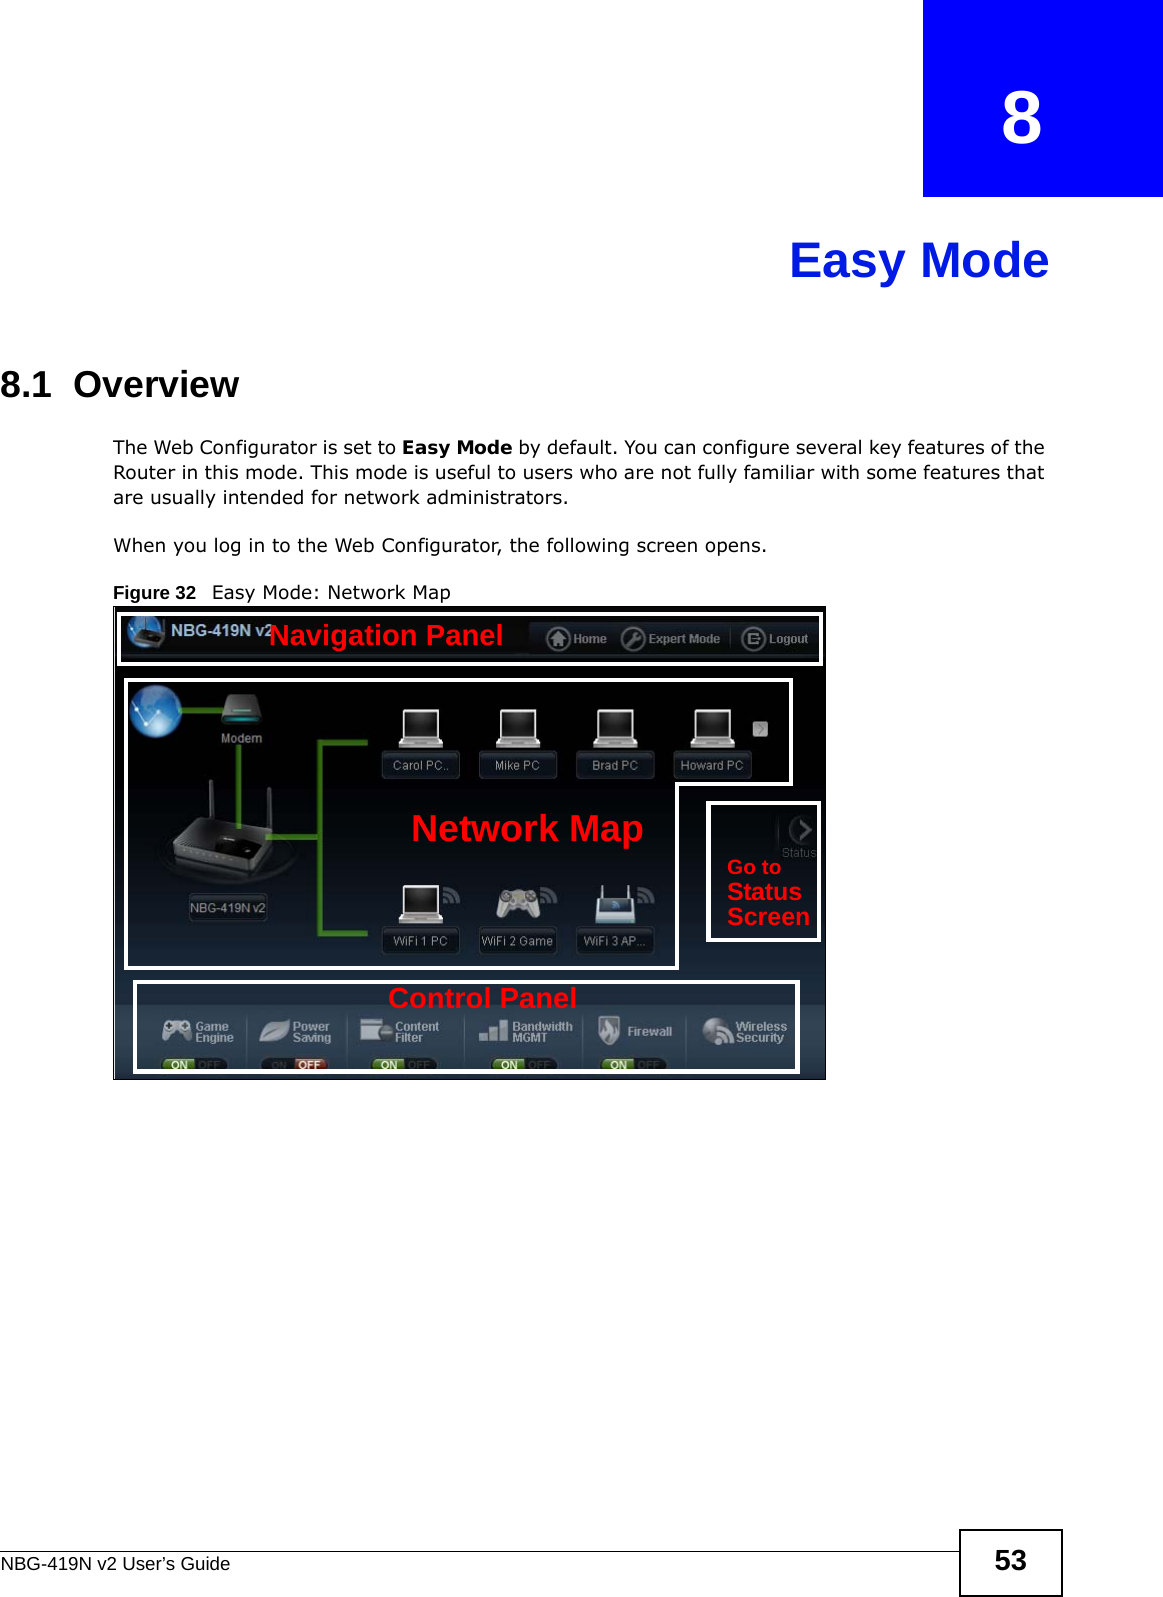 NBG-419N v2 User’s Guide 53CHAPTER   8Easy Mode8.1  OverviewThe Web Configurator is set to Easy Mode by default. You can configure several key features of the Router in this mode. This mode is useful to users who are not fully familiar with some features that are usually intended for network administrators.When you log in to the Web Configurator, the following screen opens.Figure 32   Easy Mode: Network Map Network MapControl PanelGo toStatusScreenNavigation Panel